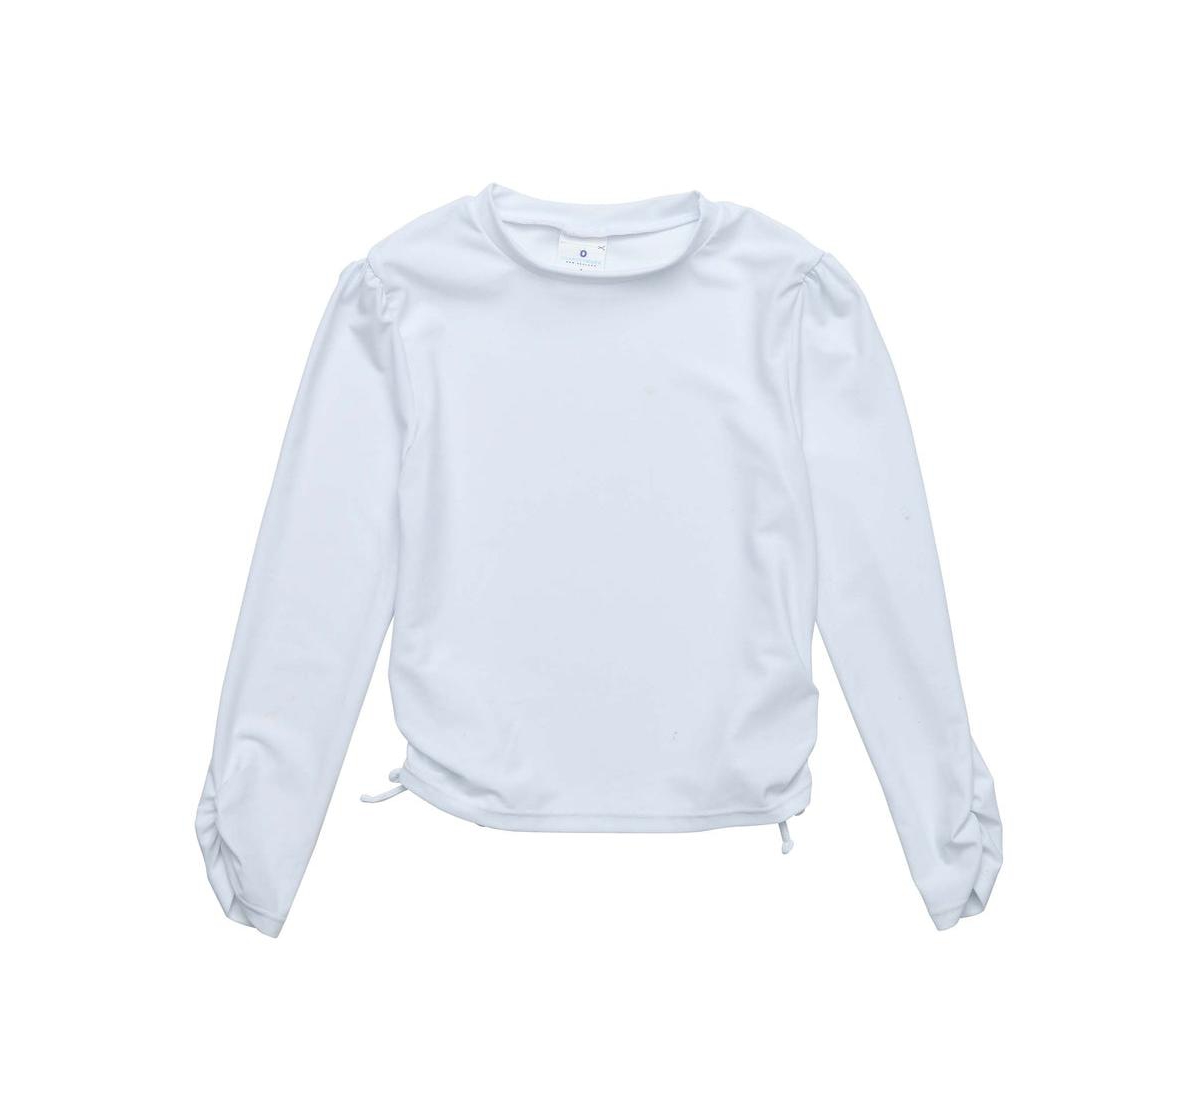 SNAPPER ROCK TODDLER, CHILD GIRLS WHITE ROUCHED LS RASH TOP